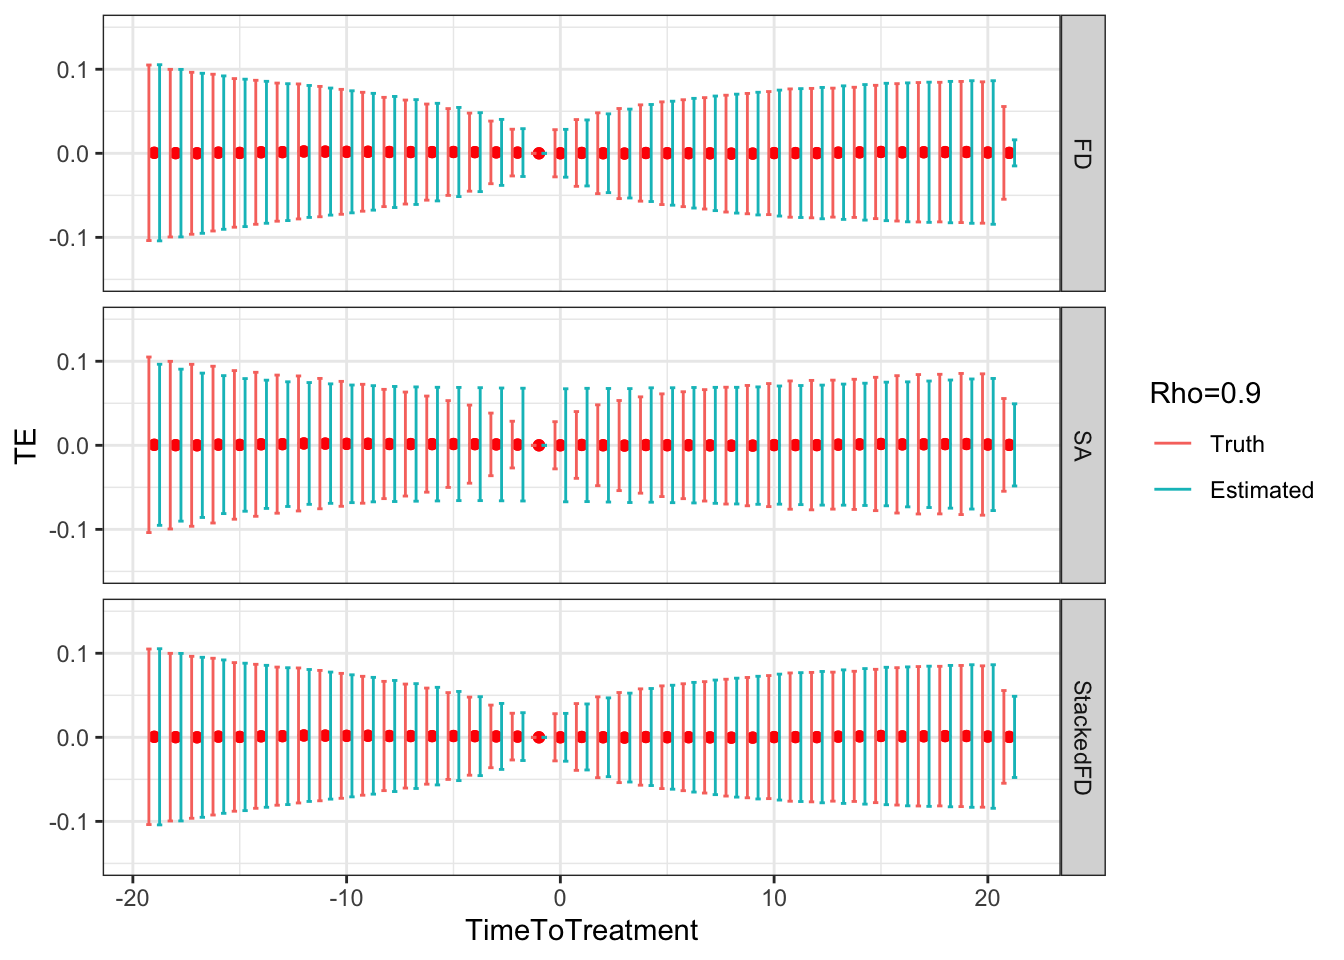 DID estimates with increasing temporal autocorrelation in outcomes